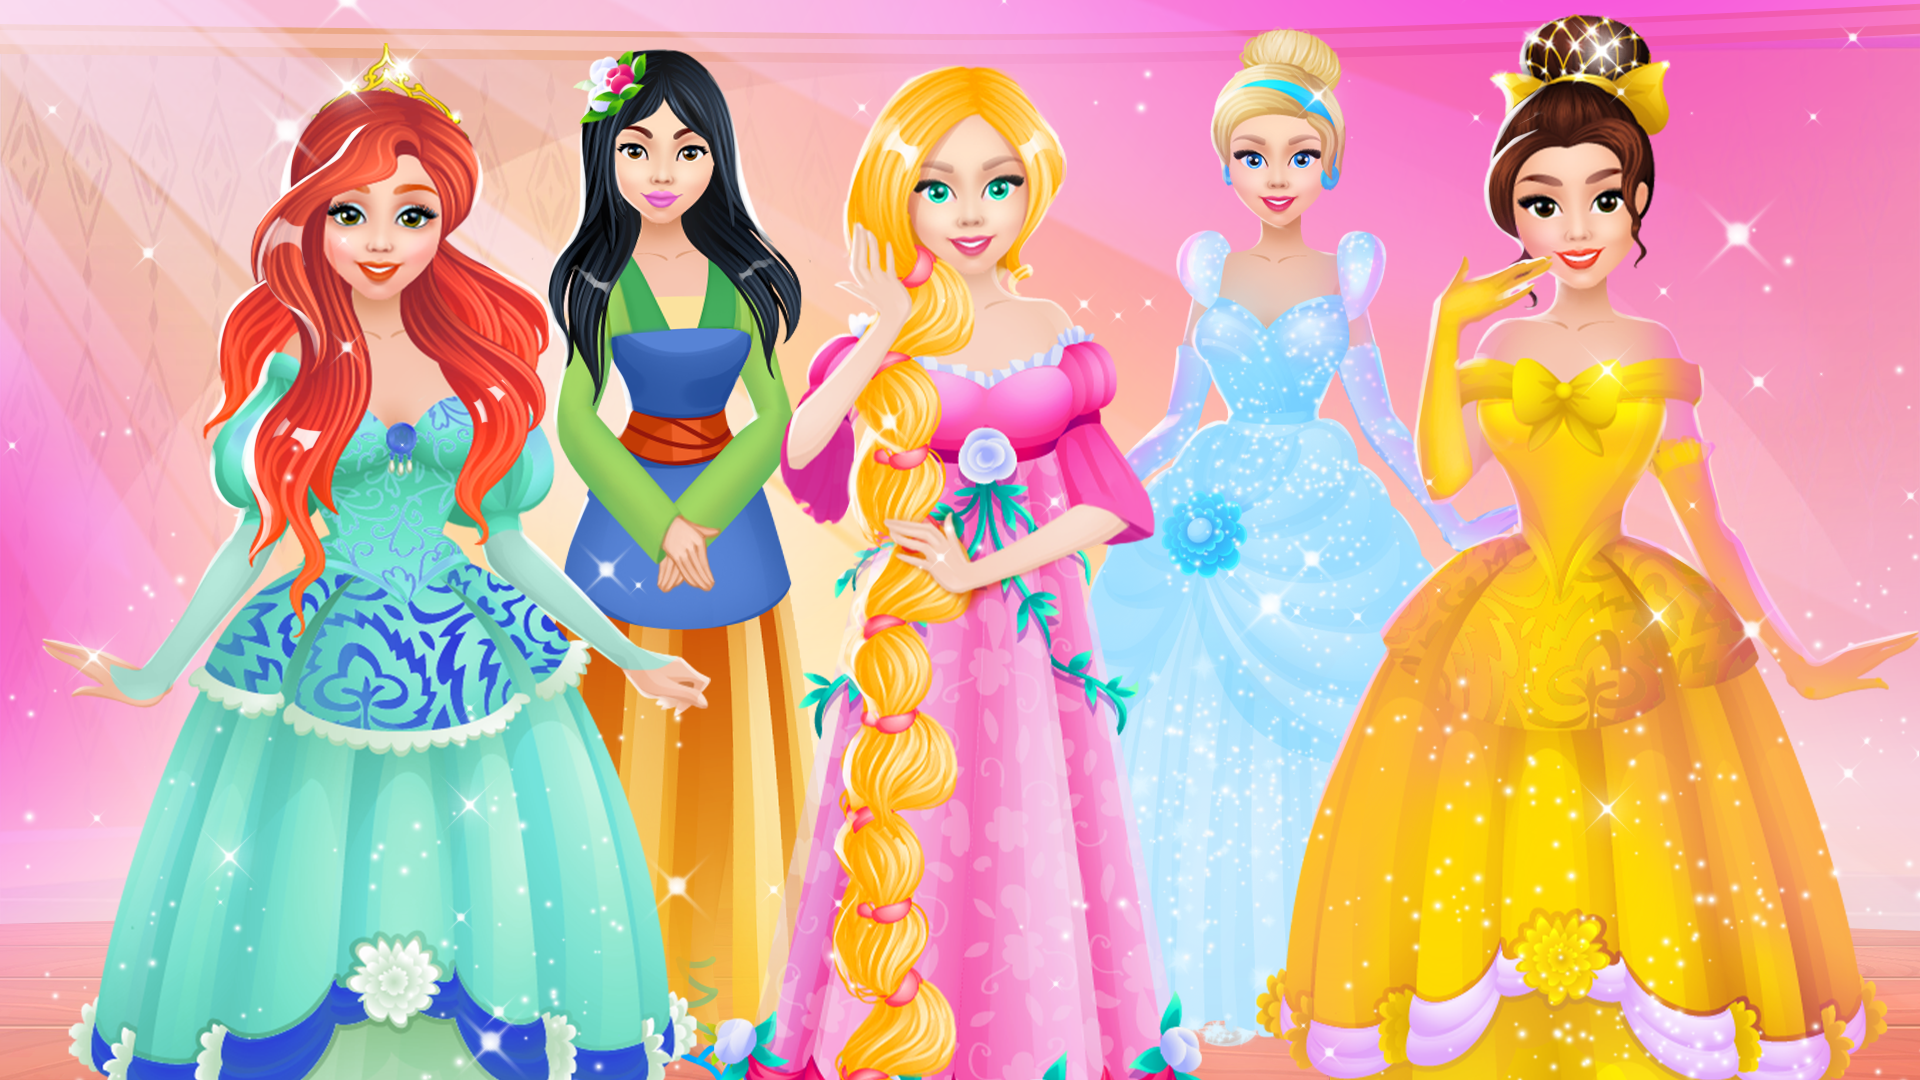 Glam Dress Up - Fashion Games For Girls:Amazon.com:Appstore for Android